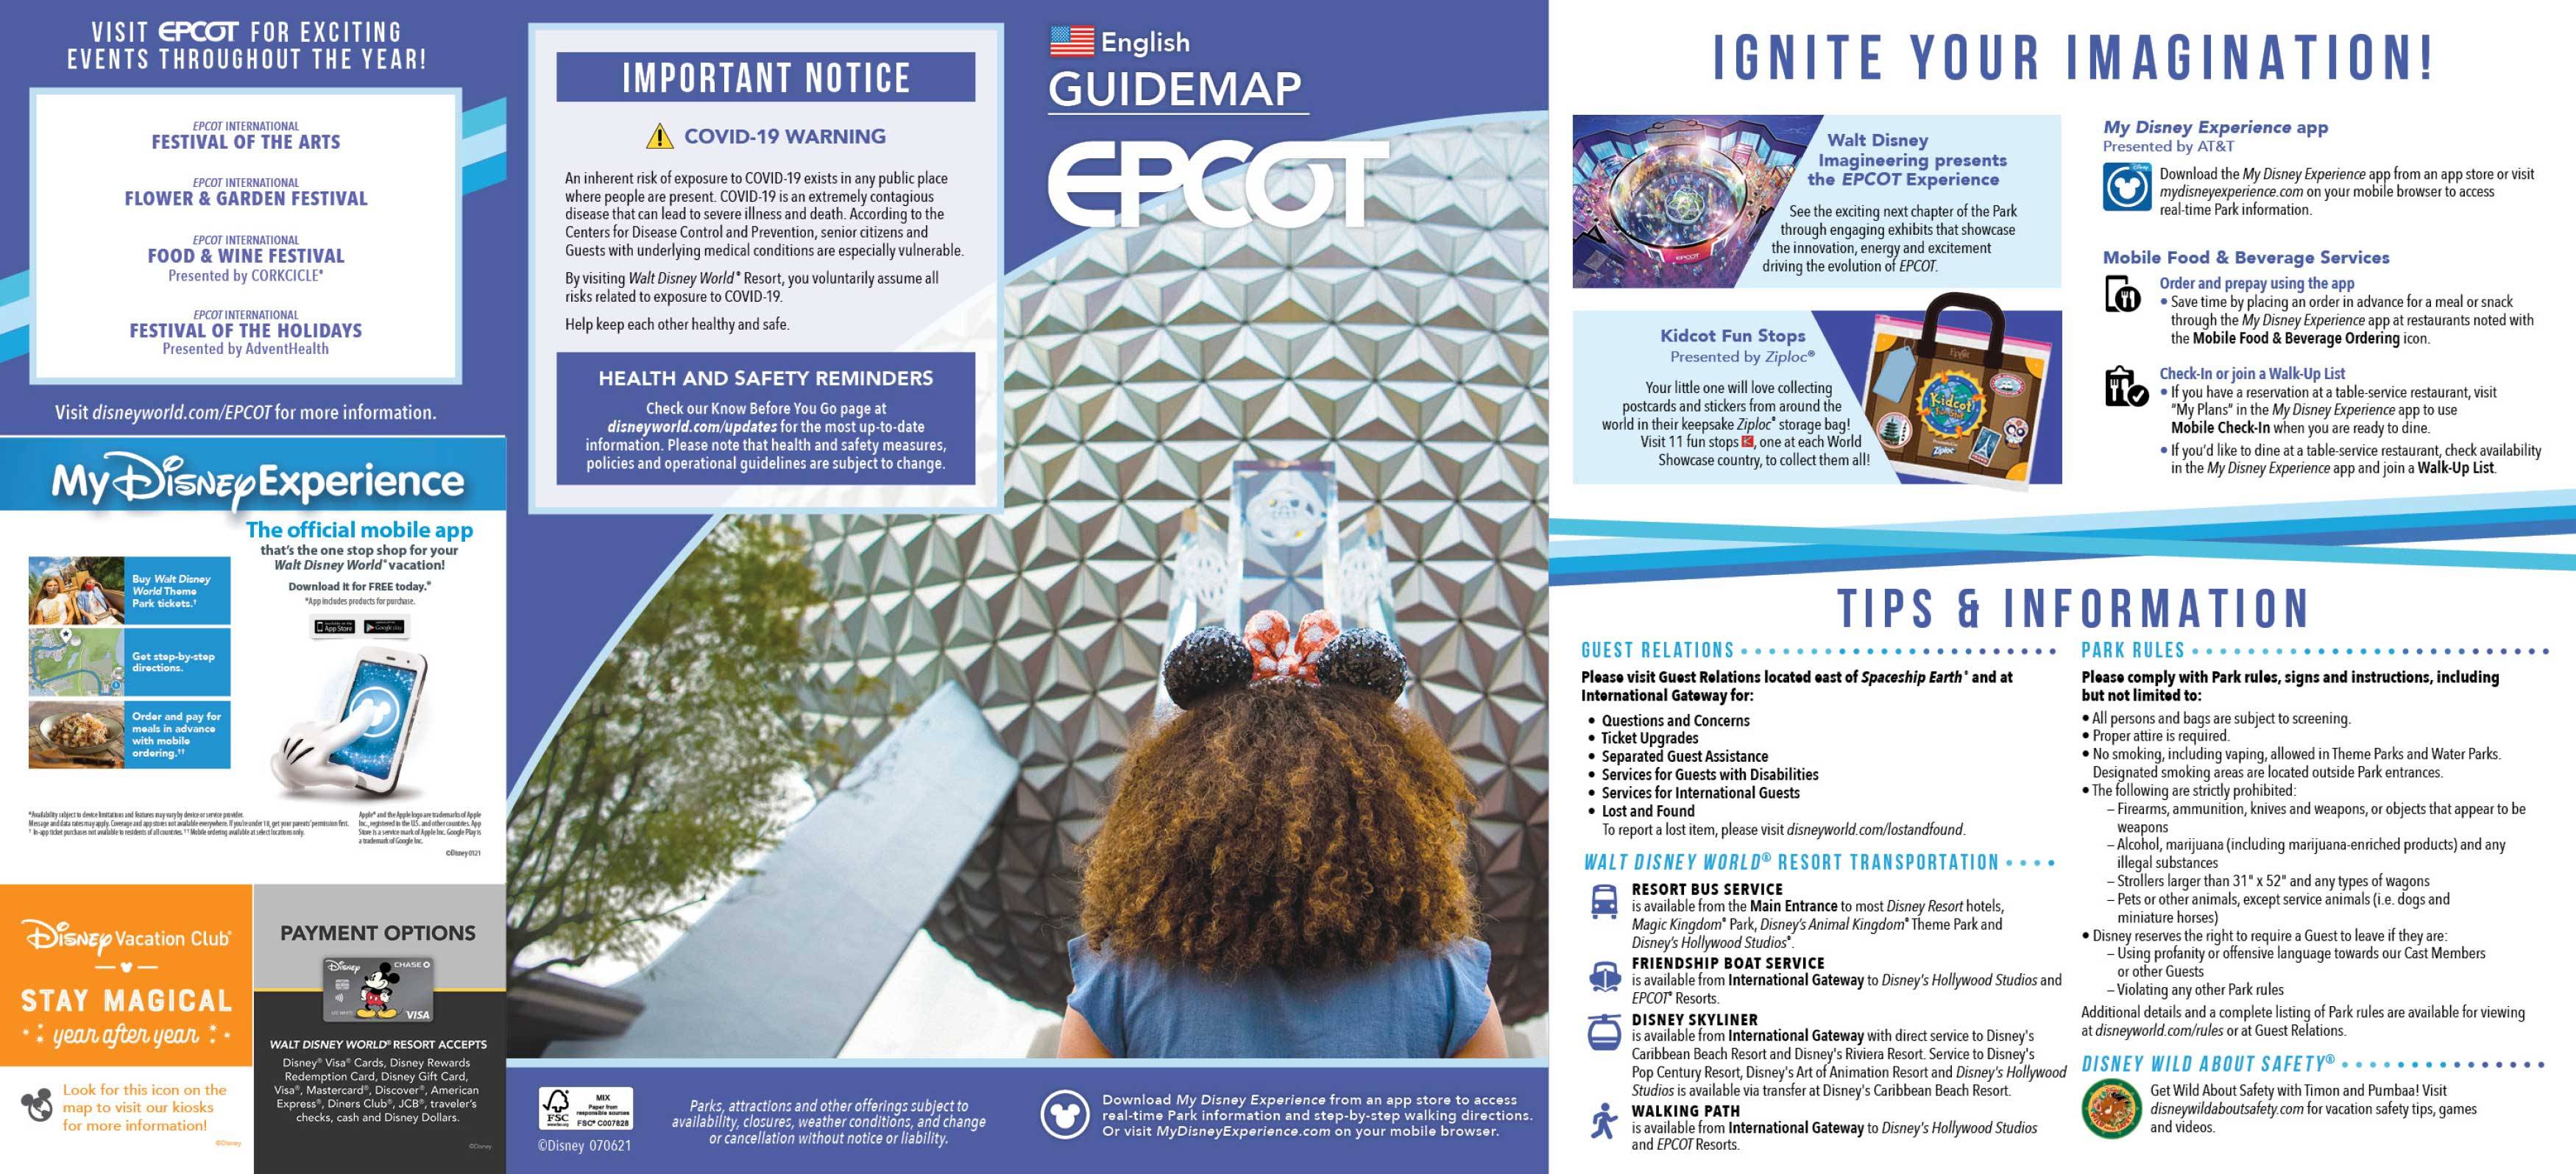 New EPCOT Guide map includes Creations Shop and Club Cool